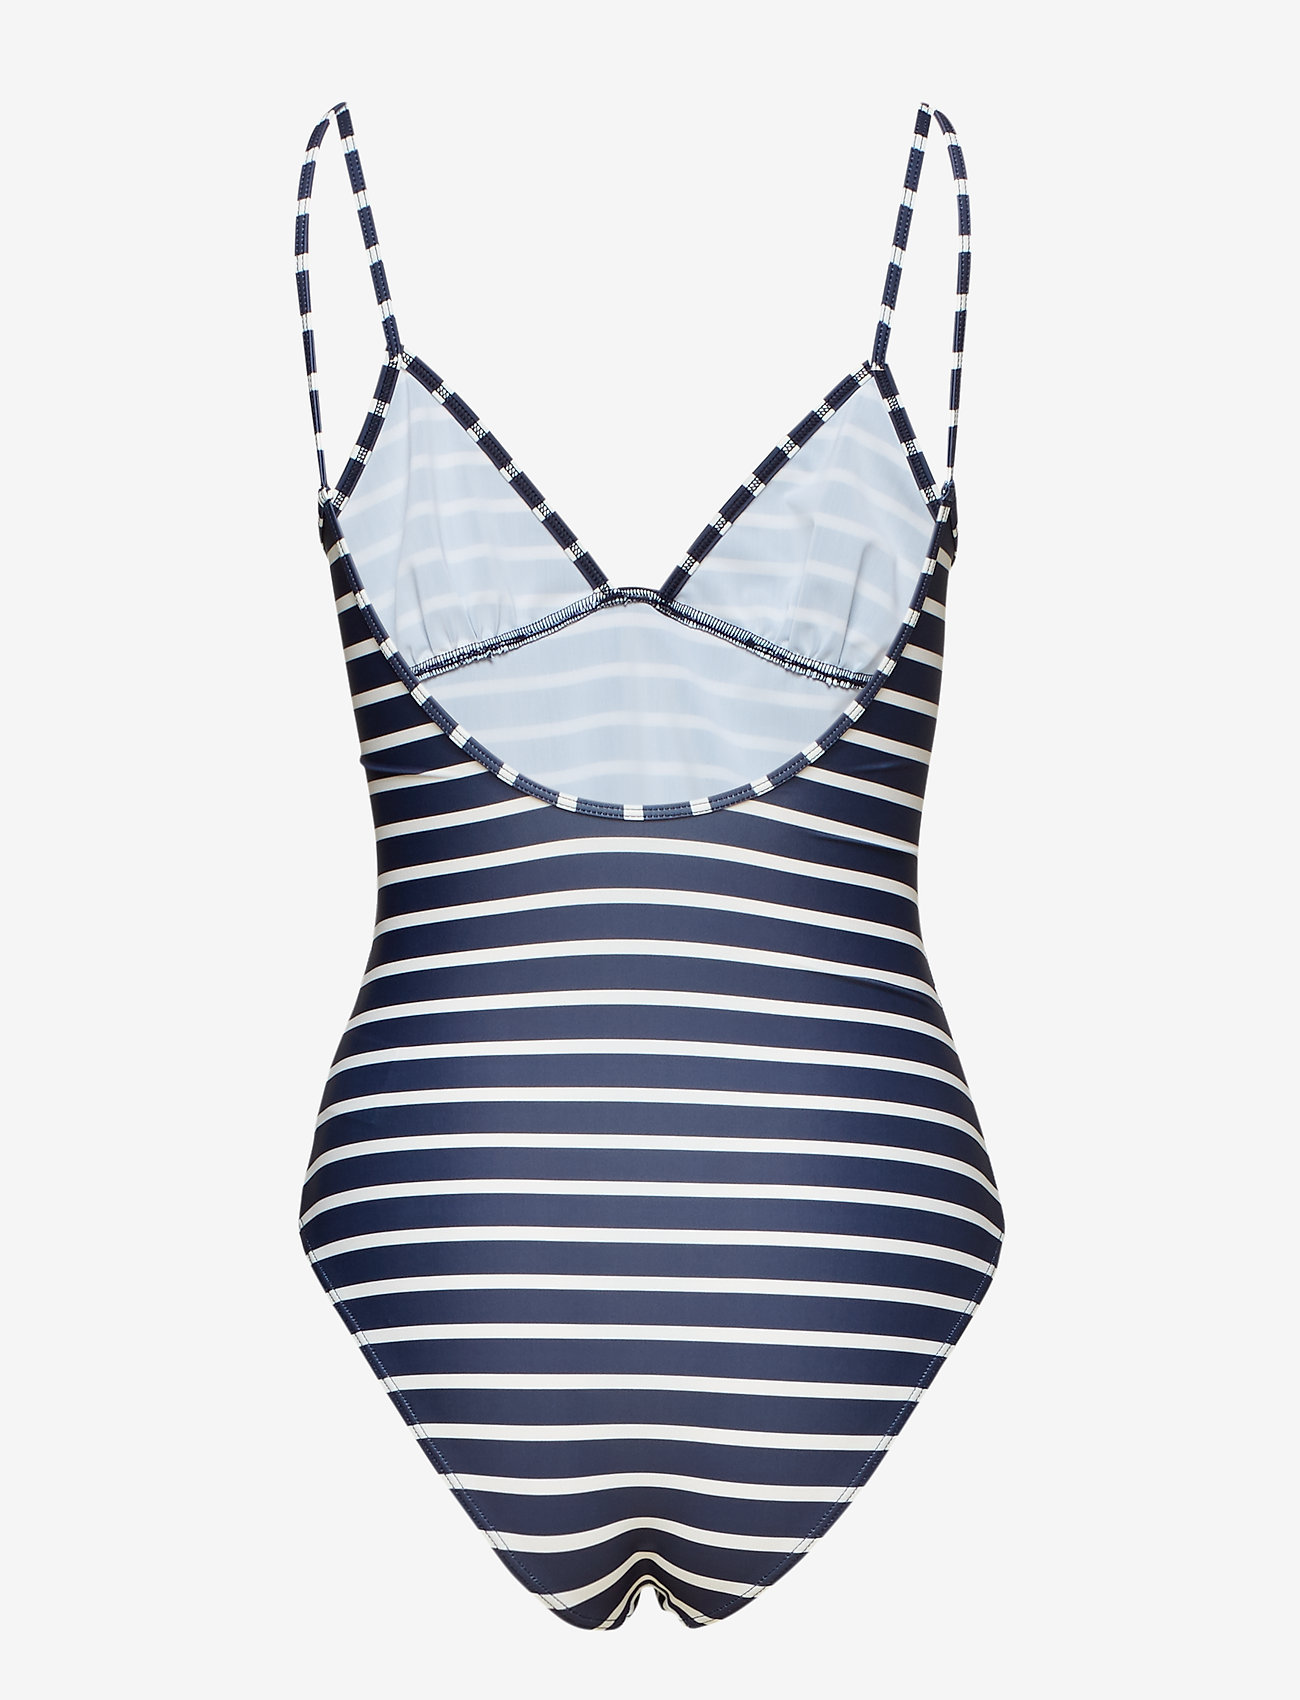 Double A by Wood Wood - Rio swimsuit - badeanzüge - navy/offwhite stripe - 1